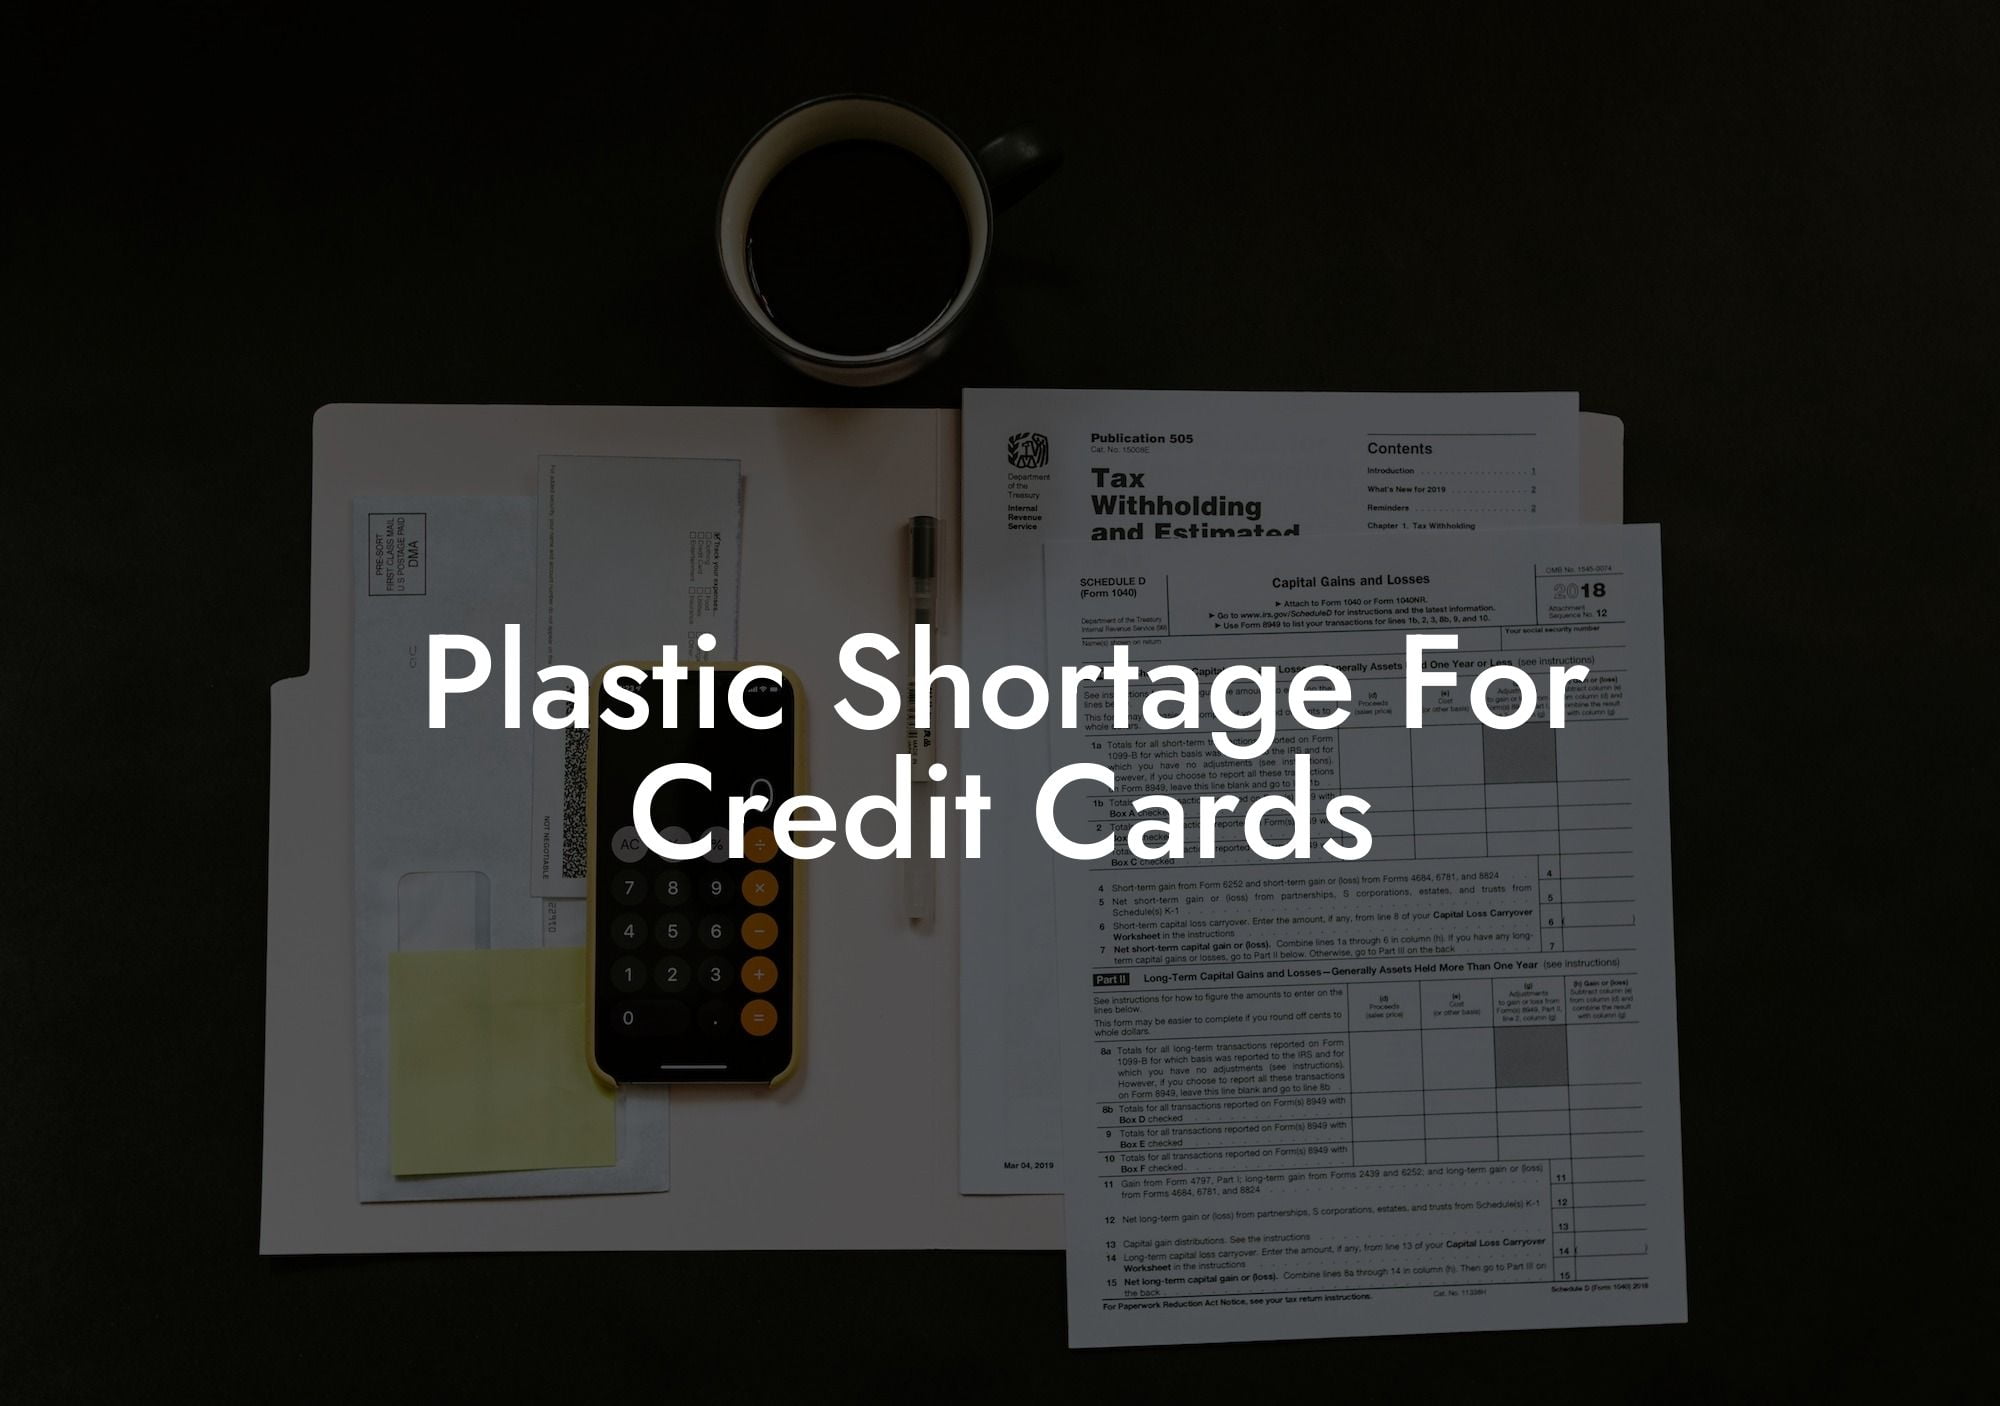 Plastic Shortage For Credit Cards